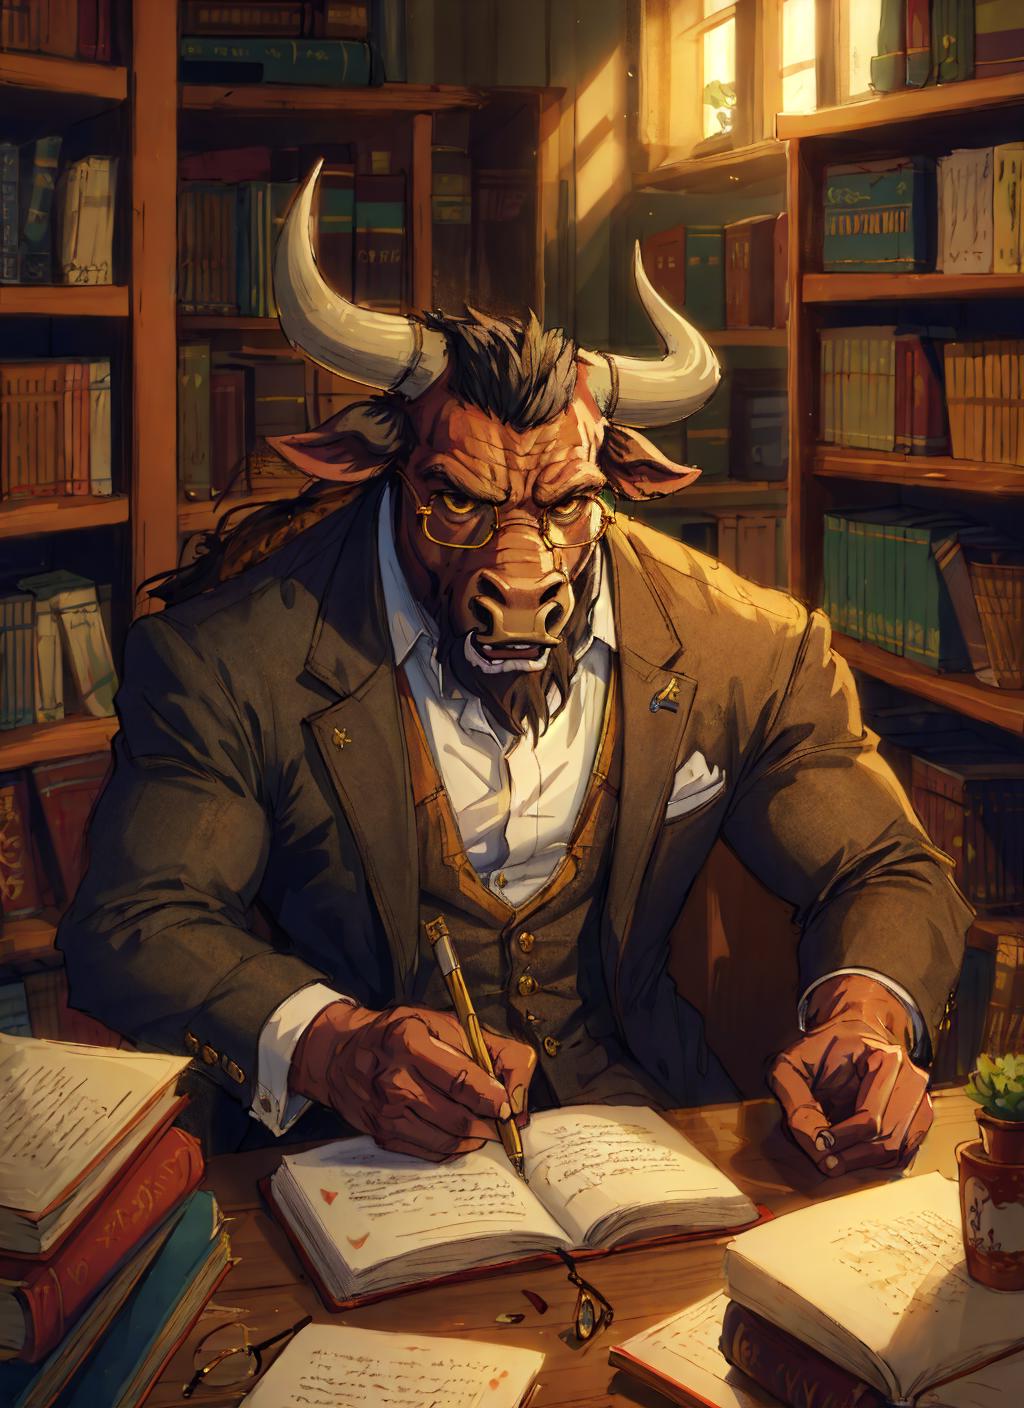 A horned bull in a suit and tie writing a letter.